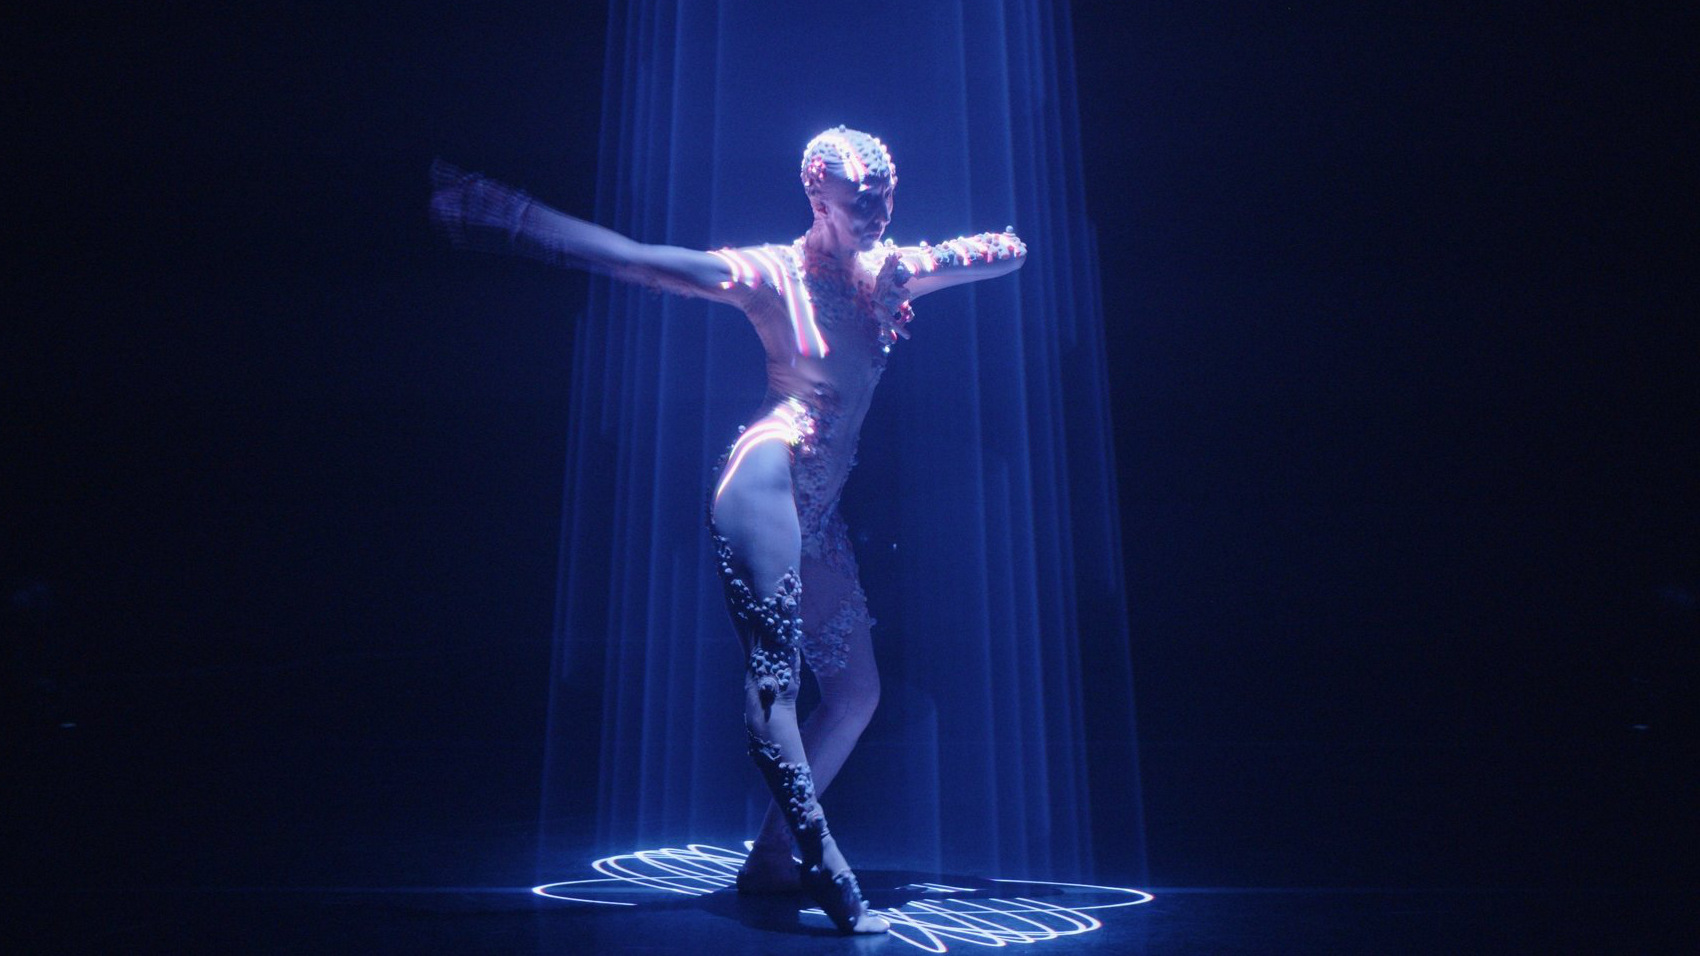 Credit: Instituto Stocos Spanish choreographer and dancer Muriel Romero wears a bodysuit containing motion sensors that interact with light beams and artificial intelligence.